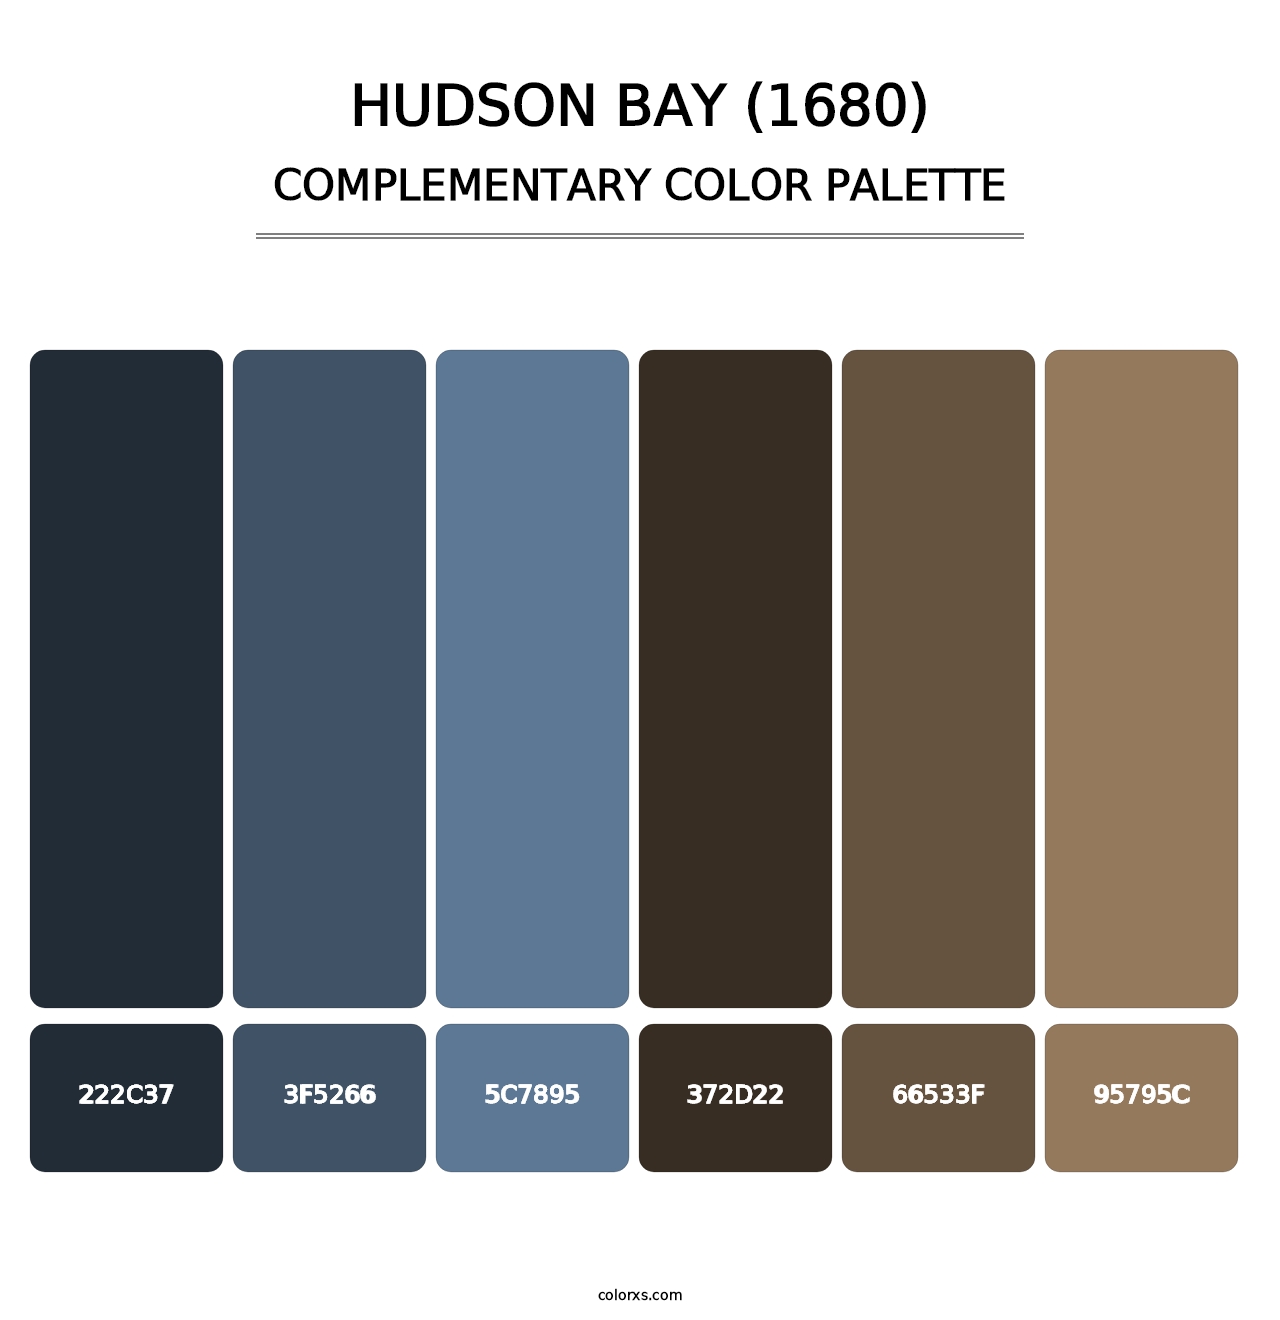 Hudson Bay (1680) - Complementary Color Palette